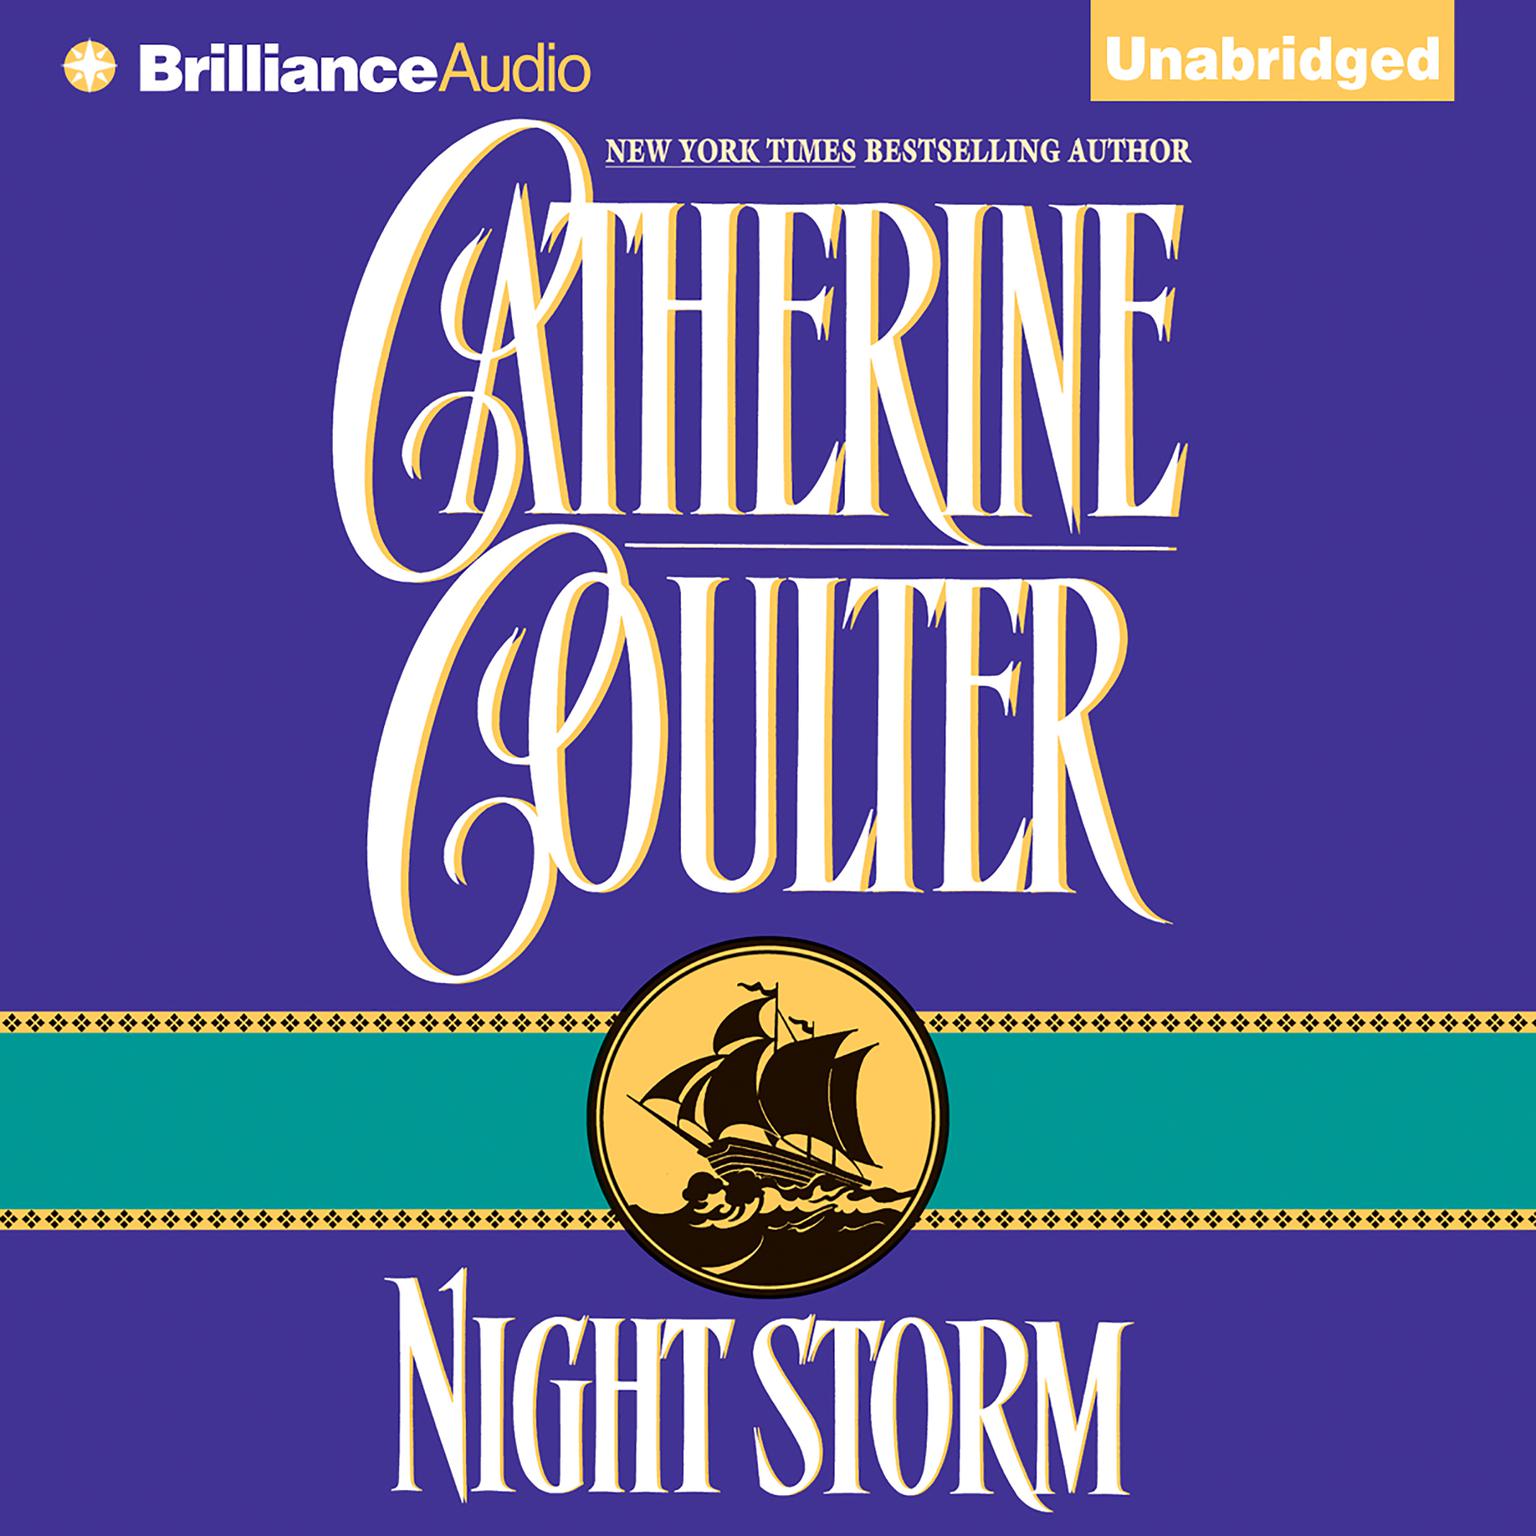 Night Storm Audiobook, by Catherine Coulter